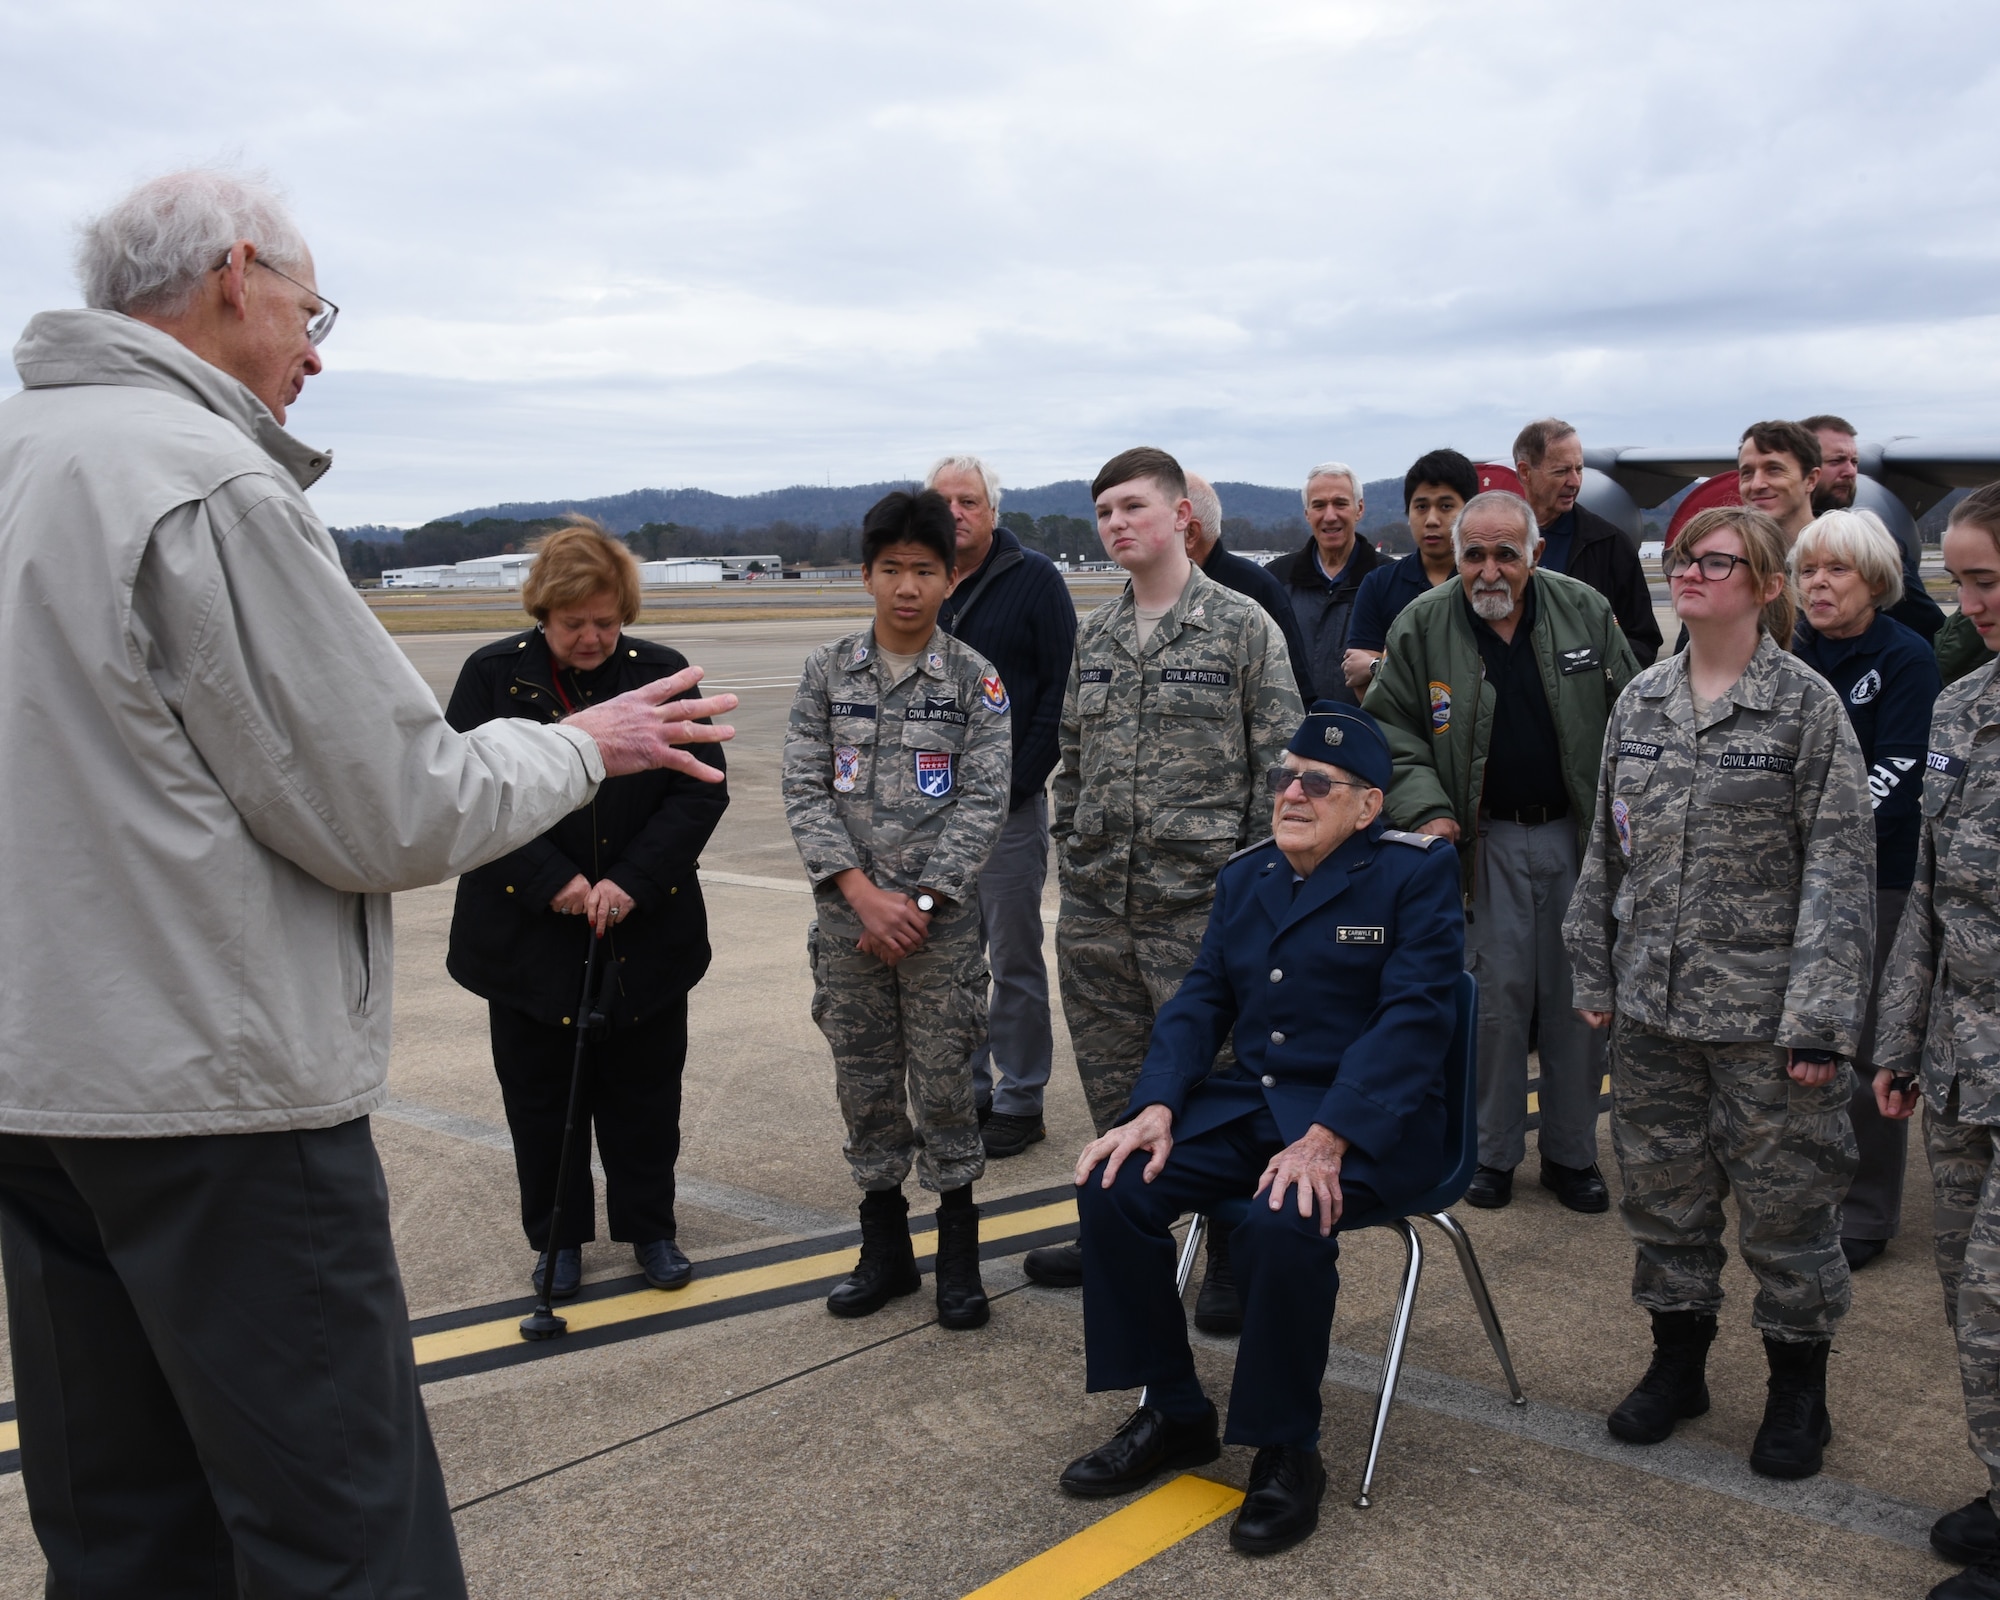 The Civil Air Patrol’s 117th Air National Guard Composite Squadron, Charter ALA 090 visits Sumpter Smith Joint National Guard Base, Alabama.